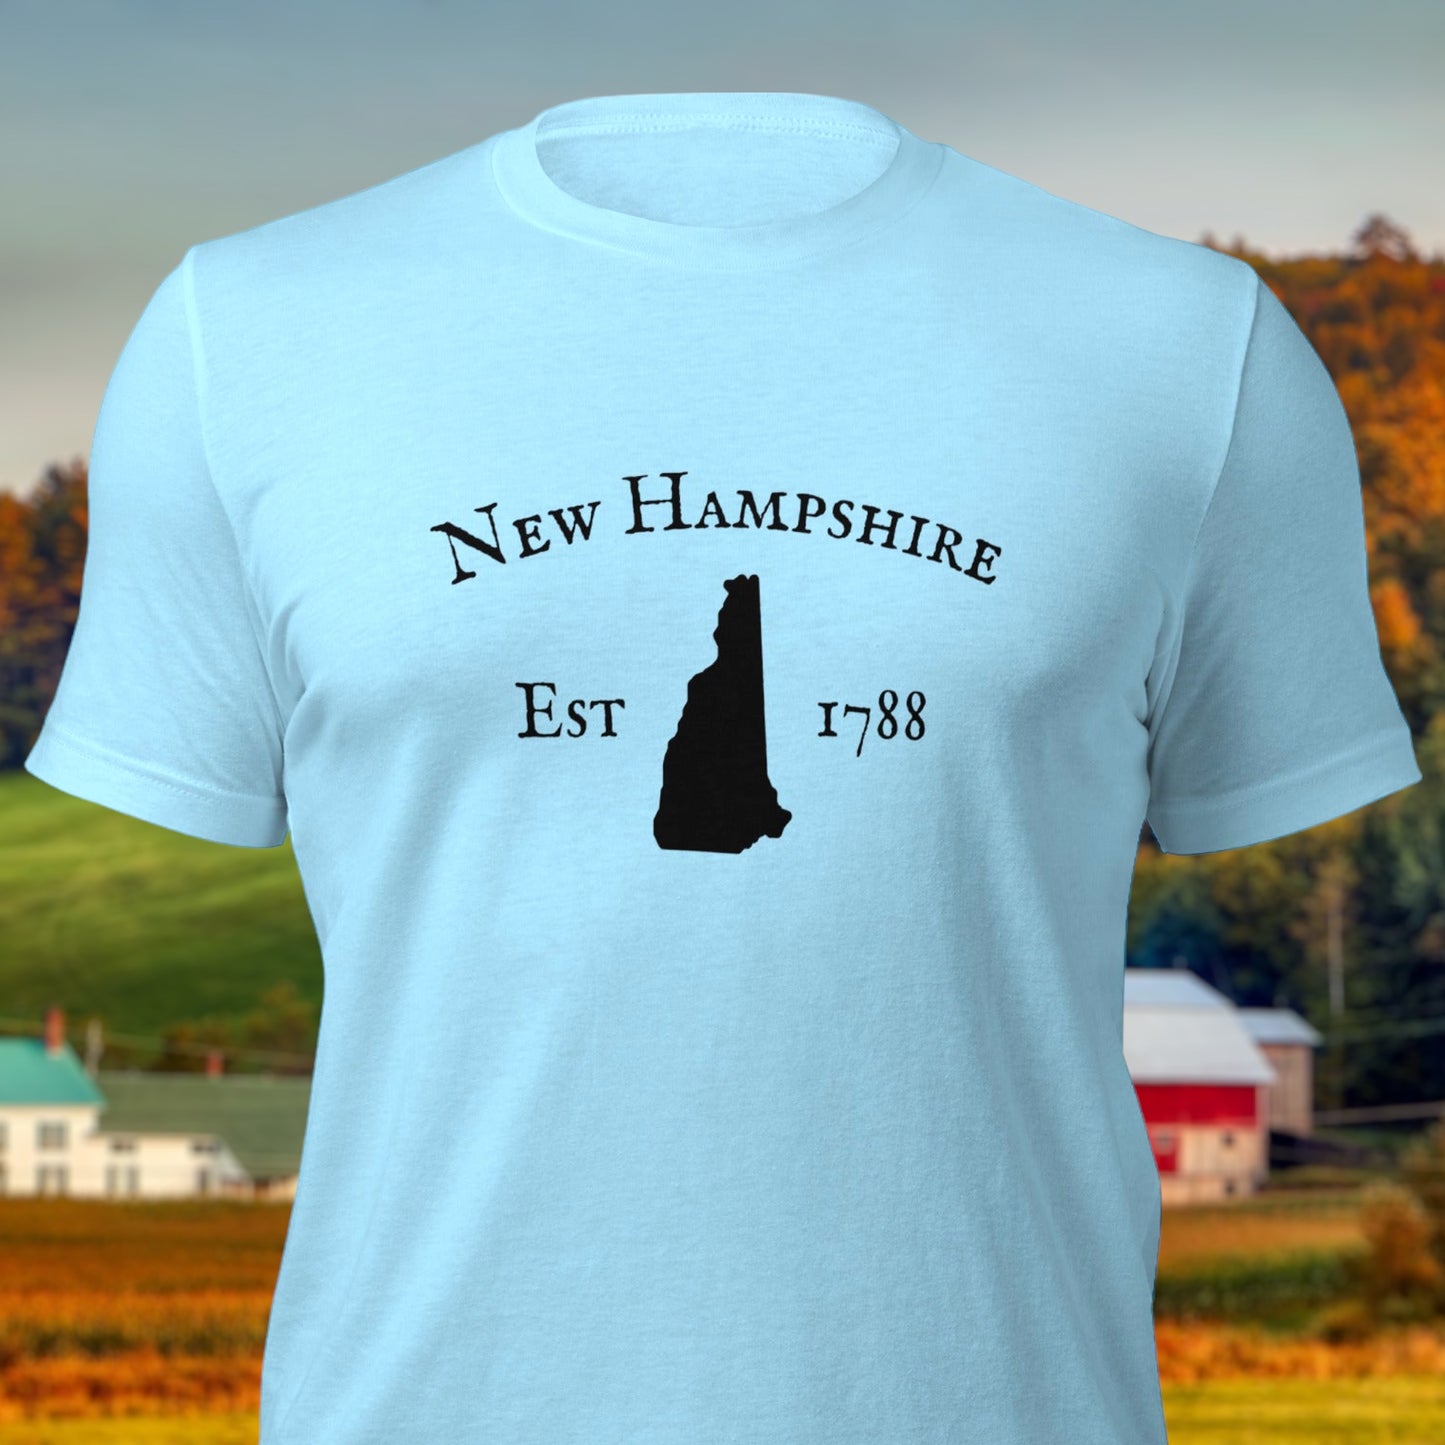 "New Hampshire Established In 1788" T-shirt - Weave Got Gifts - Unique Gifts You Won’t Find Anywhere Else!